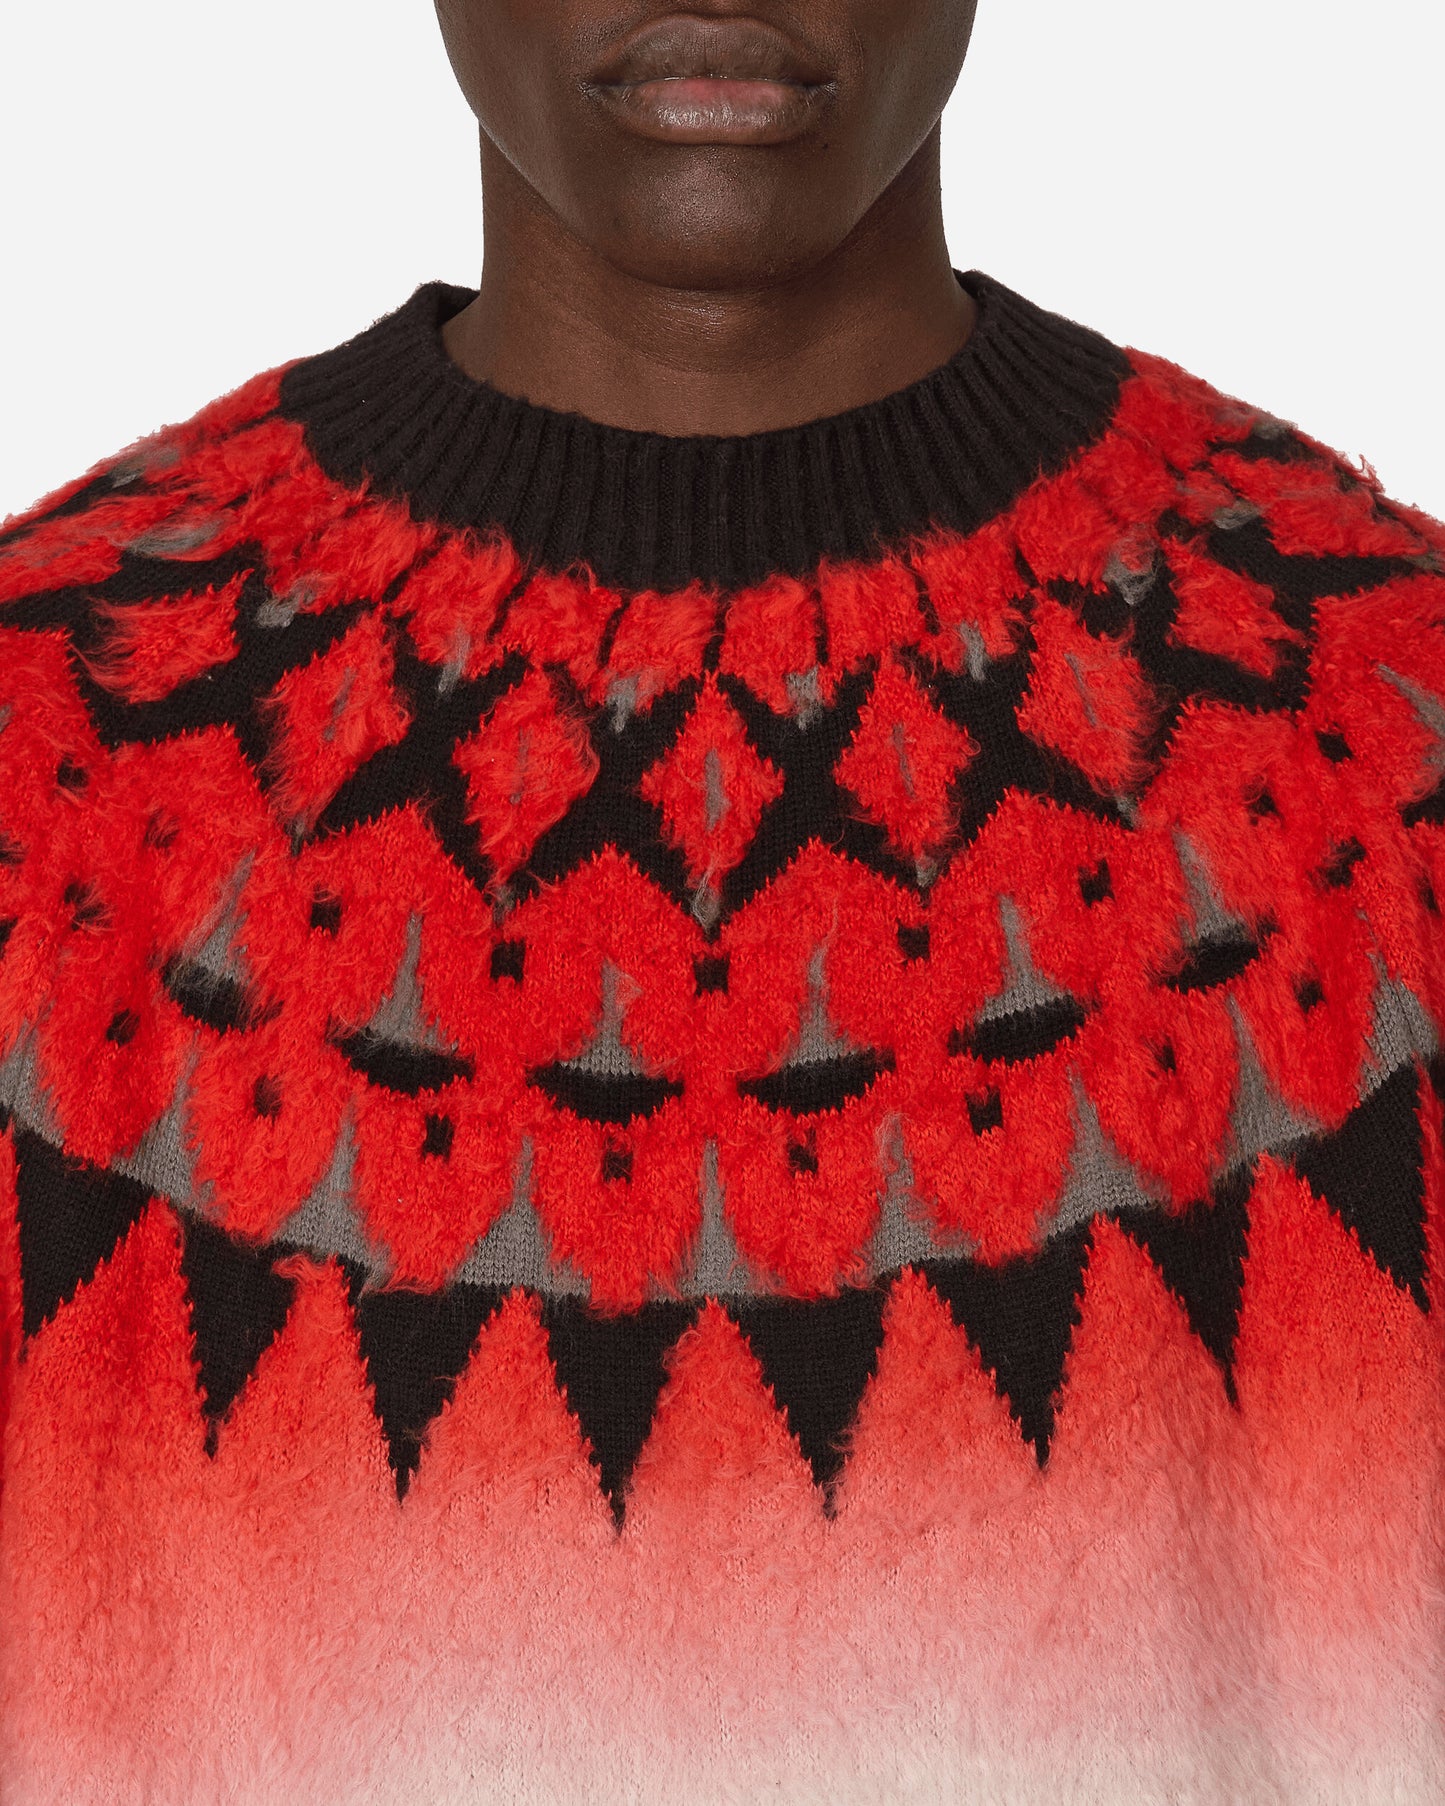 sacai Jacquard Knit Pullover Red Knitwears Sweaters 24-03334M 751